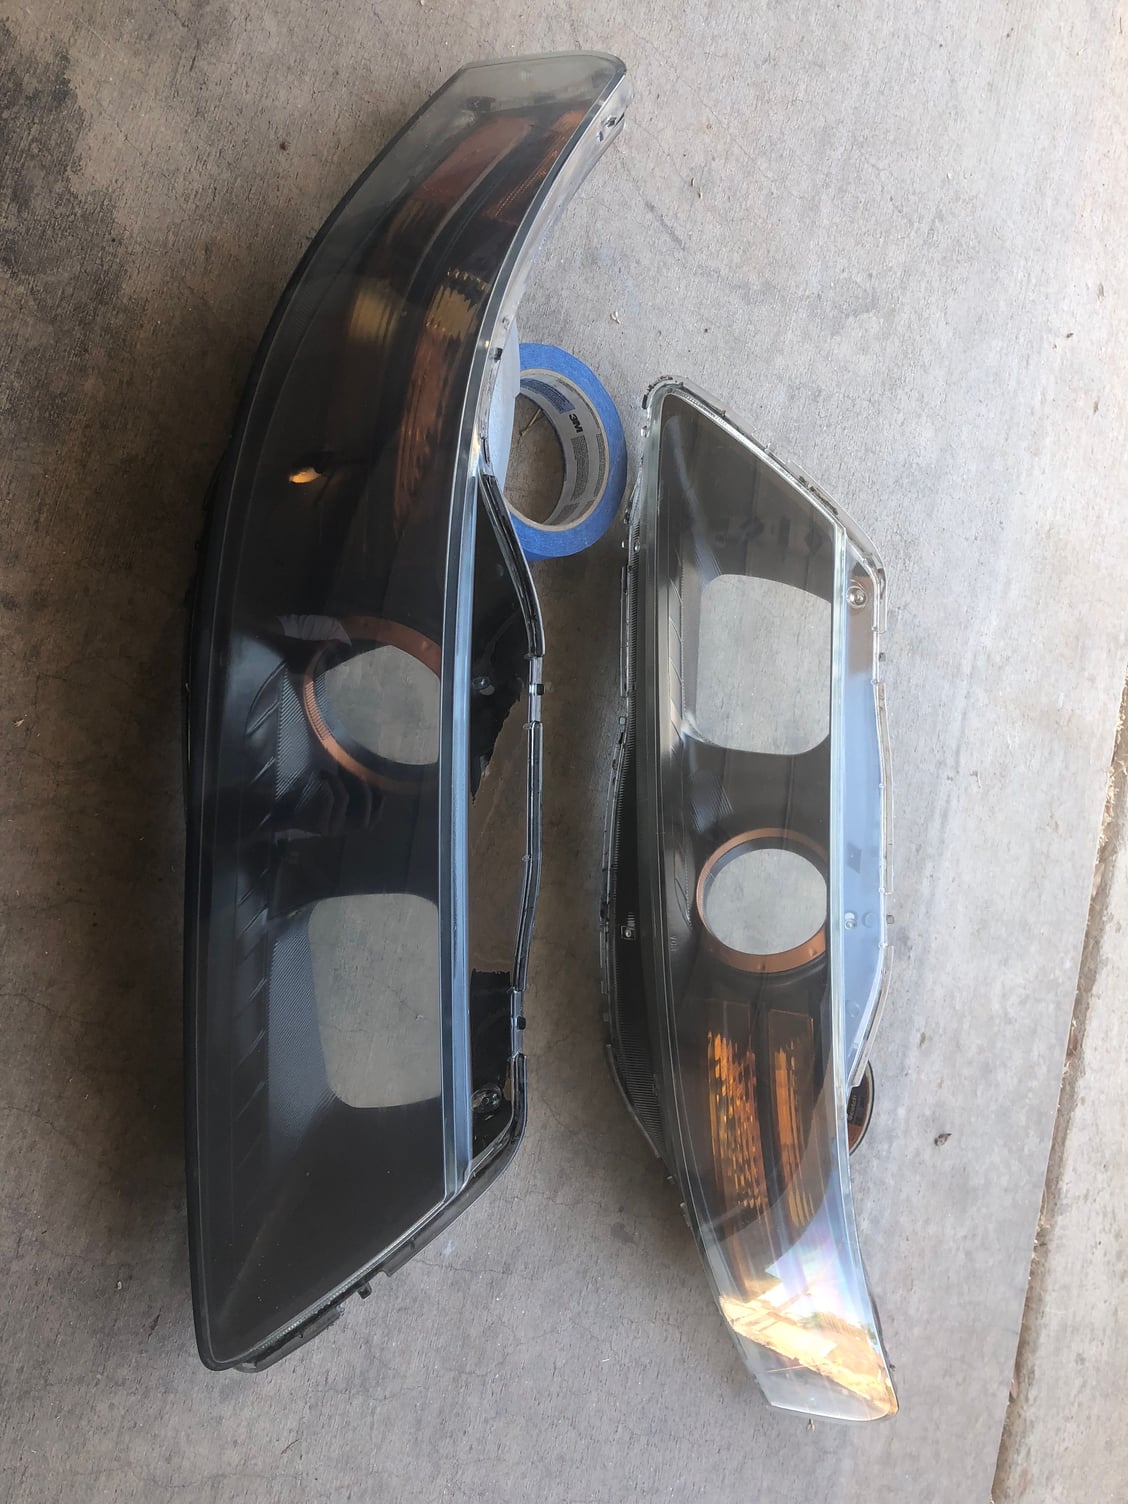 Lights - SOLD: 04-06 Acura TL Headlights (Blacked out and slightly tinted) - Used - 2004 to 2008 Acura TL - Peoria, AZ 85345, United States